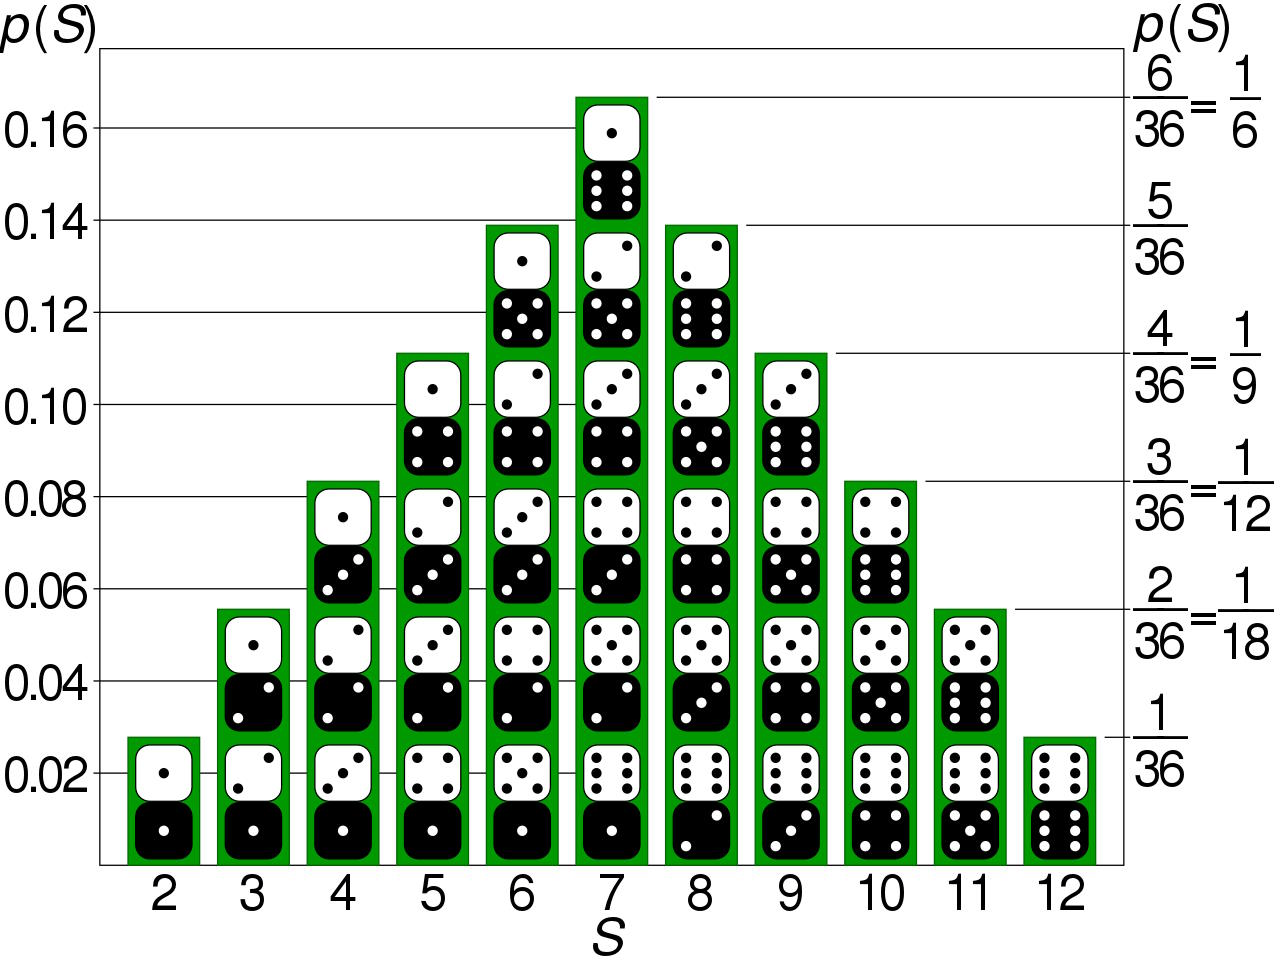 A graph showing the number of dominoes in a pyramid.